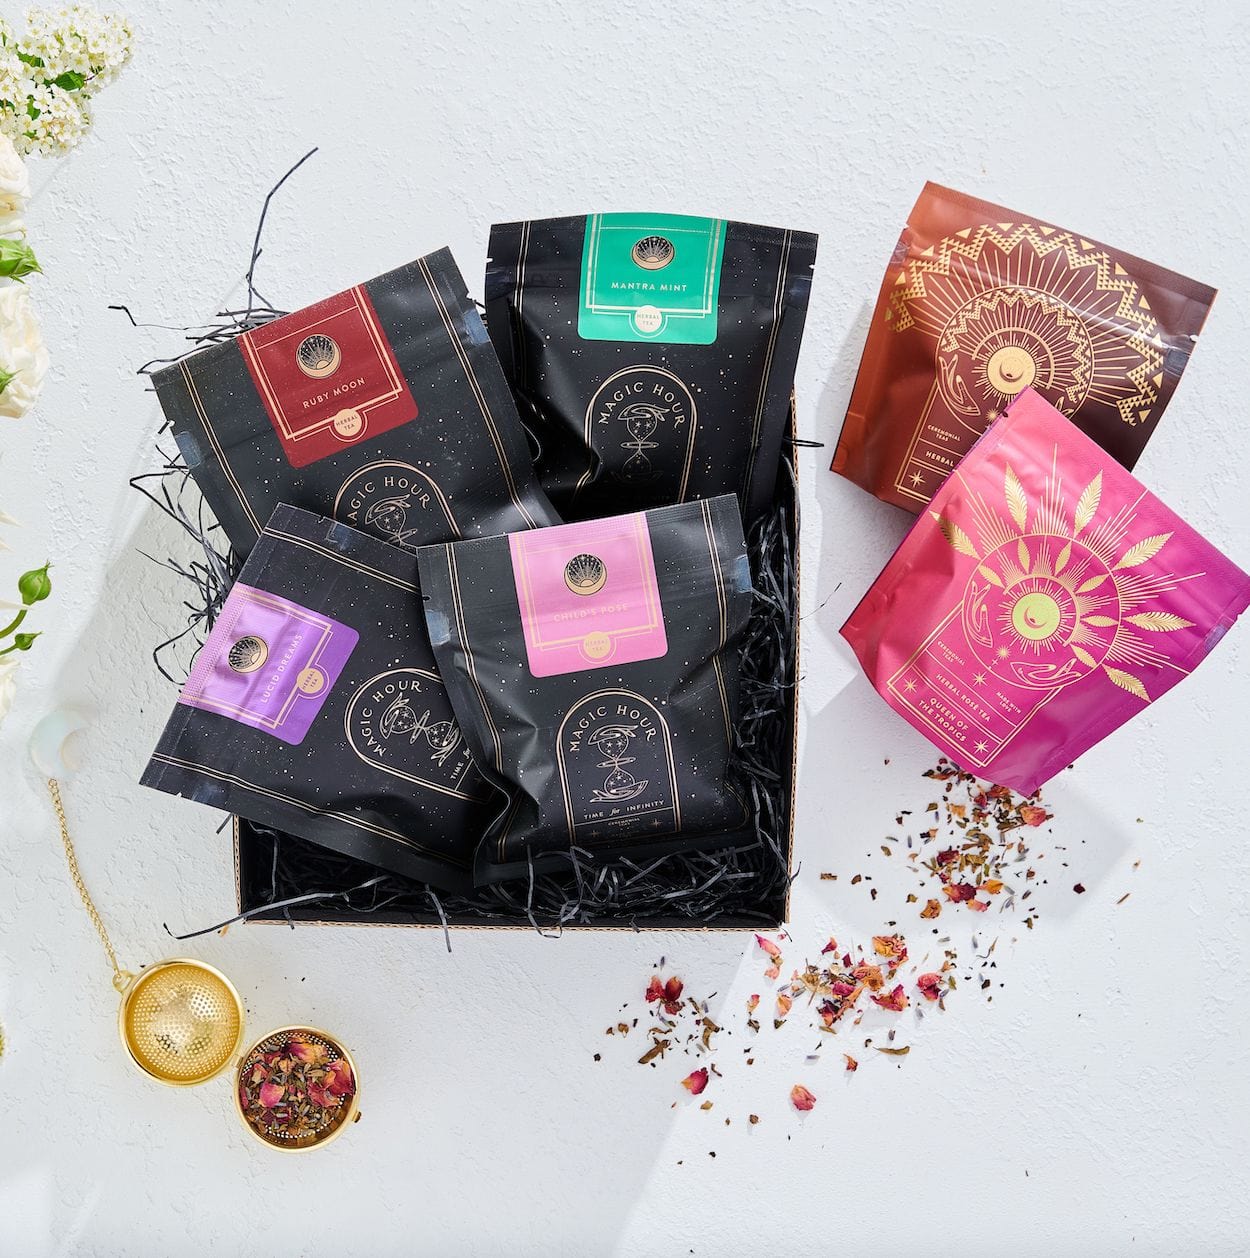 A box filled with assorted packages of loose leaf tea is displayed. The packages showcase various vibrant designs and colors, including black, pink, red, and green. A gold tea infuser with dried organic tea leaves is placed beside the **Magic Hour Herbal Magic Sampler Tea Box: Caffeine-Free Teas for Sleep, Digestion & Immunity** on a white surface.